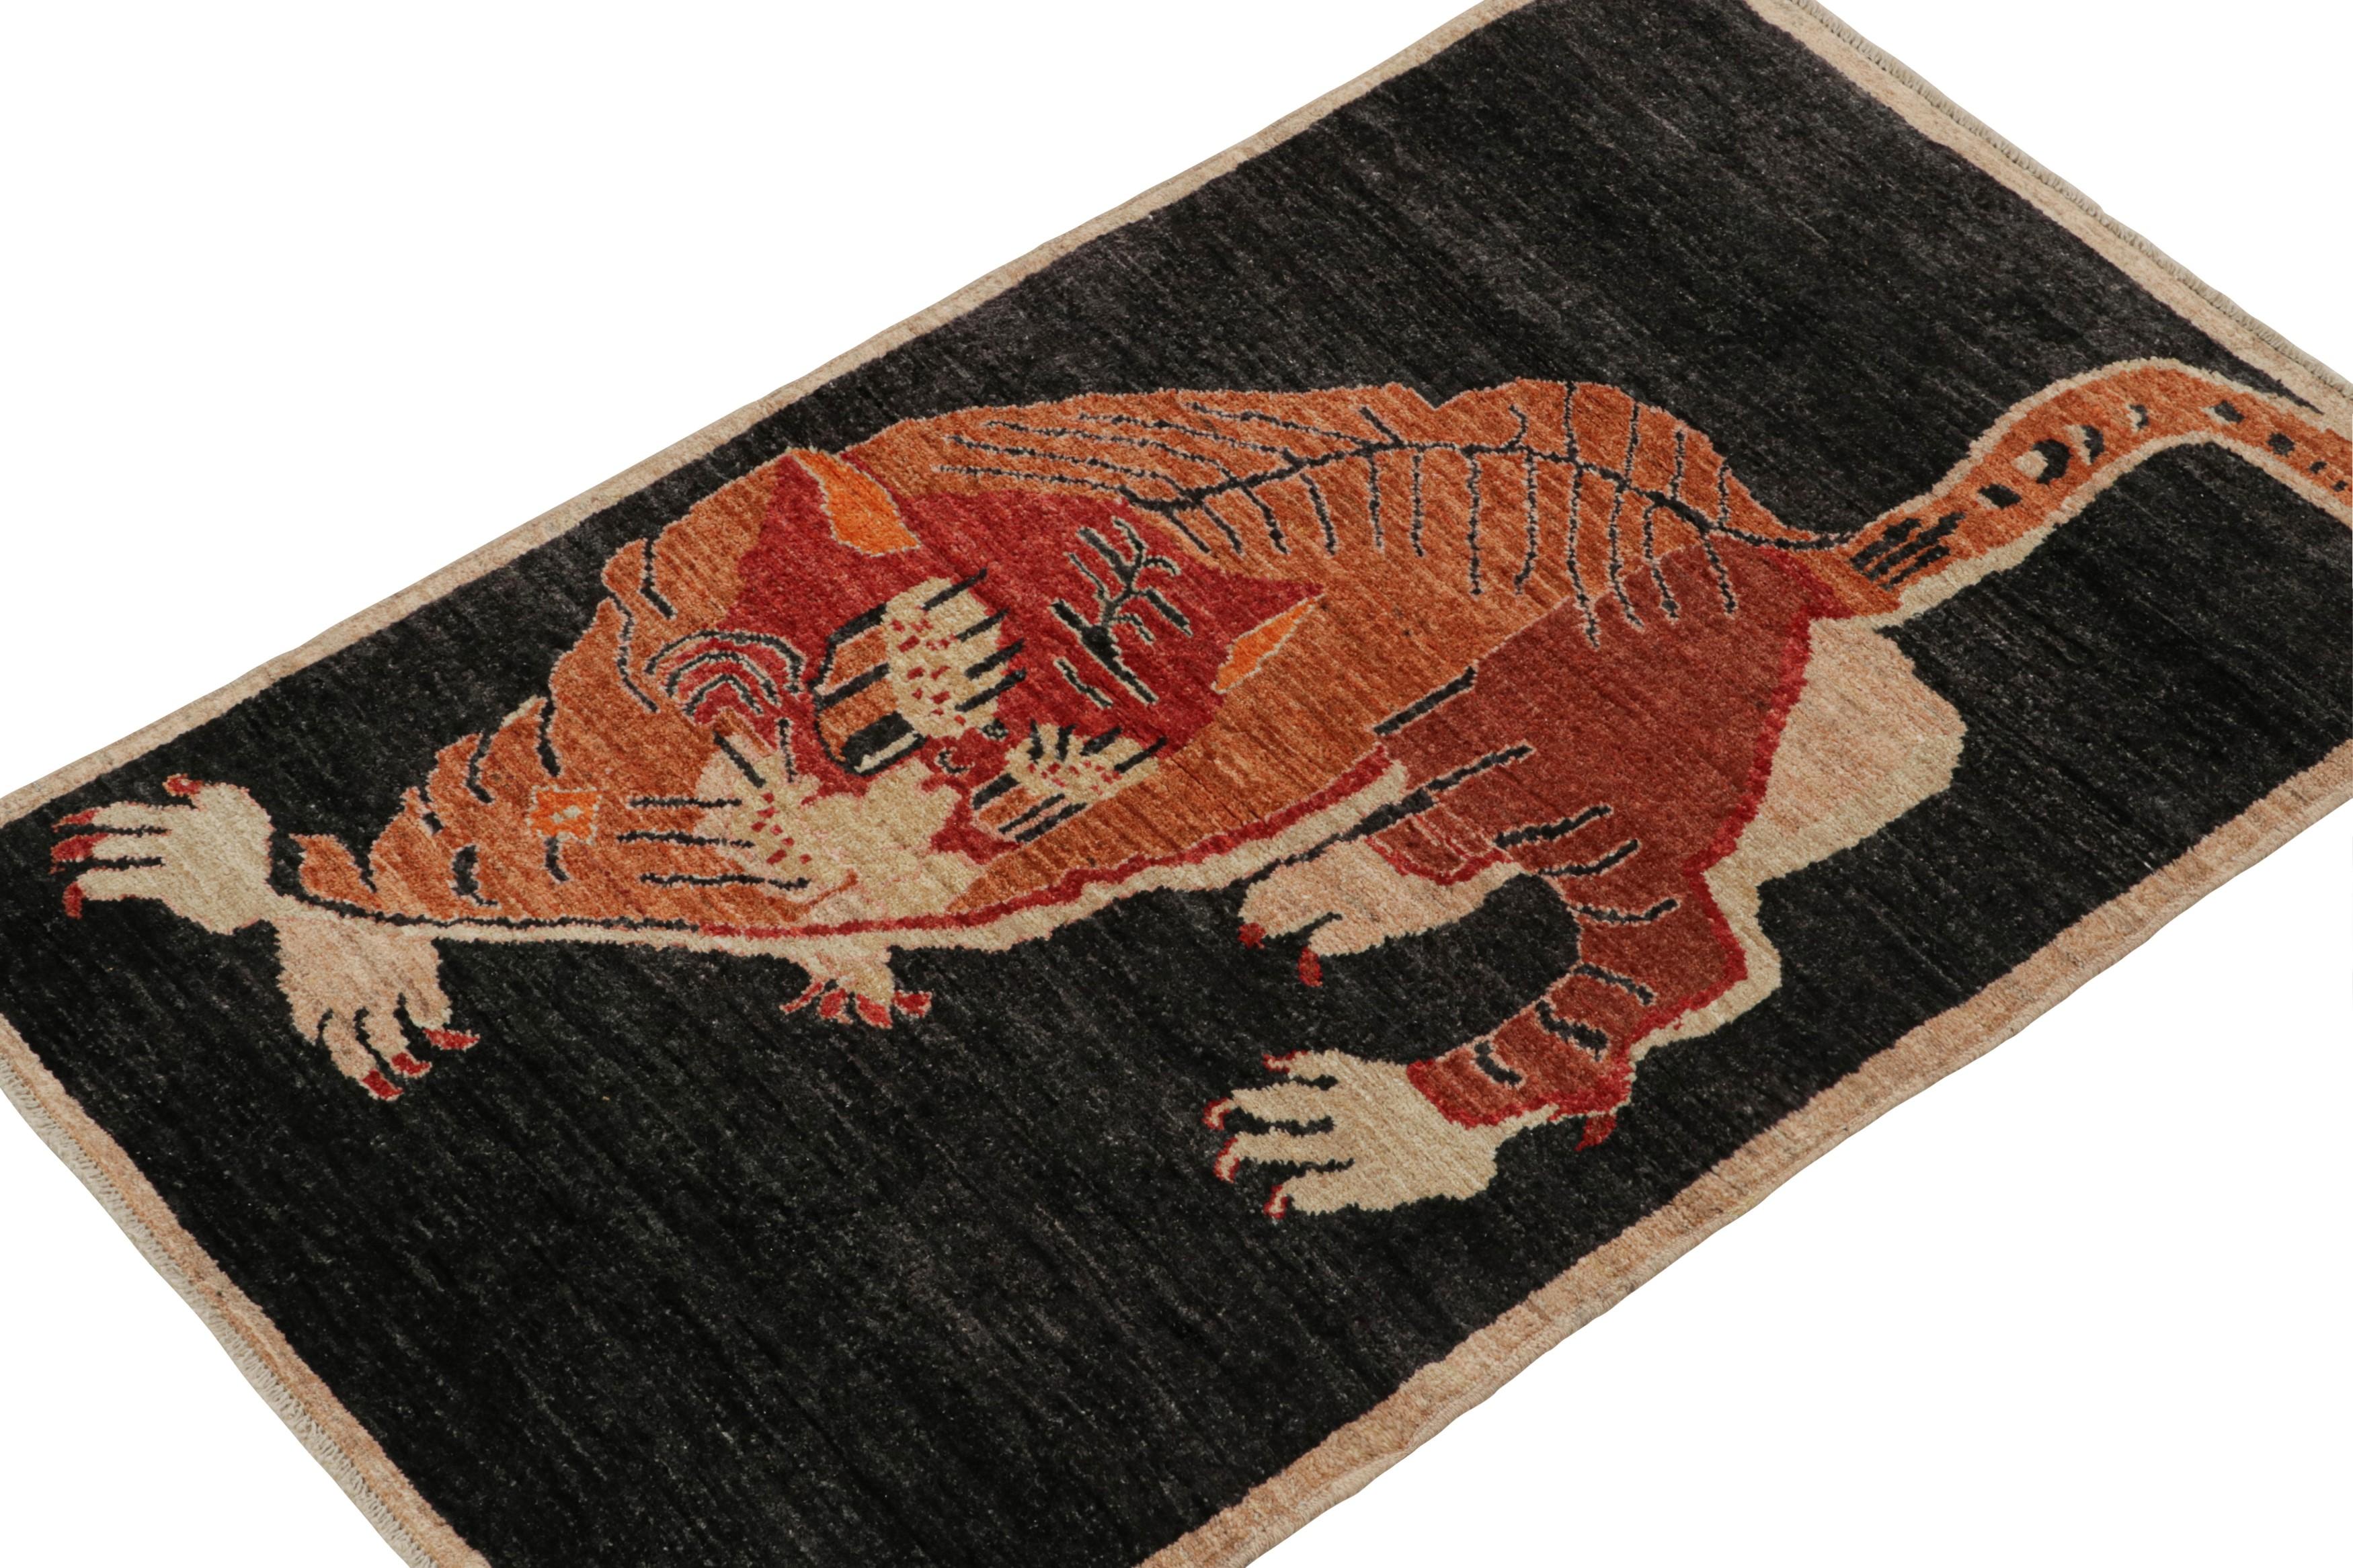 This contemporary 3x5 tiger rug is a bold new addition to Rug & Kilim’s Tigers Collection. Our collection spans several cultures and recaptures iconic pictorial styles in folk art and handmade antique Oriental rugs alike. 

Further on the